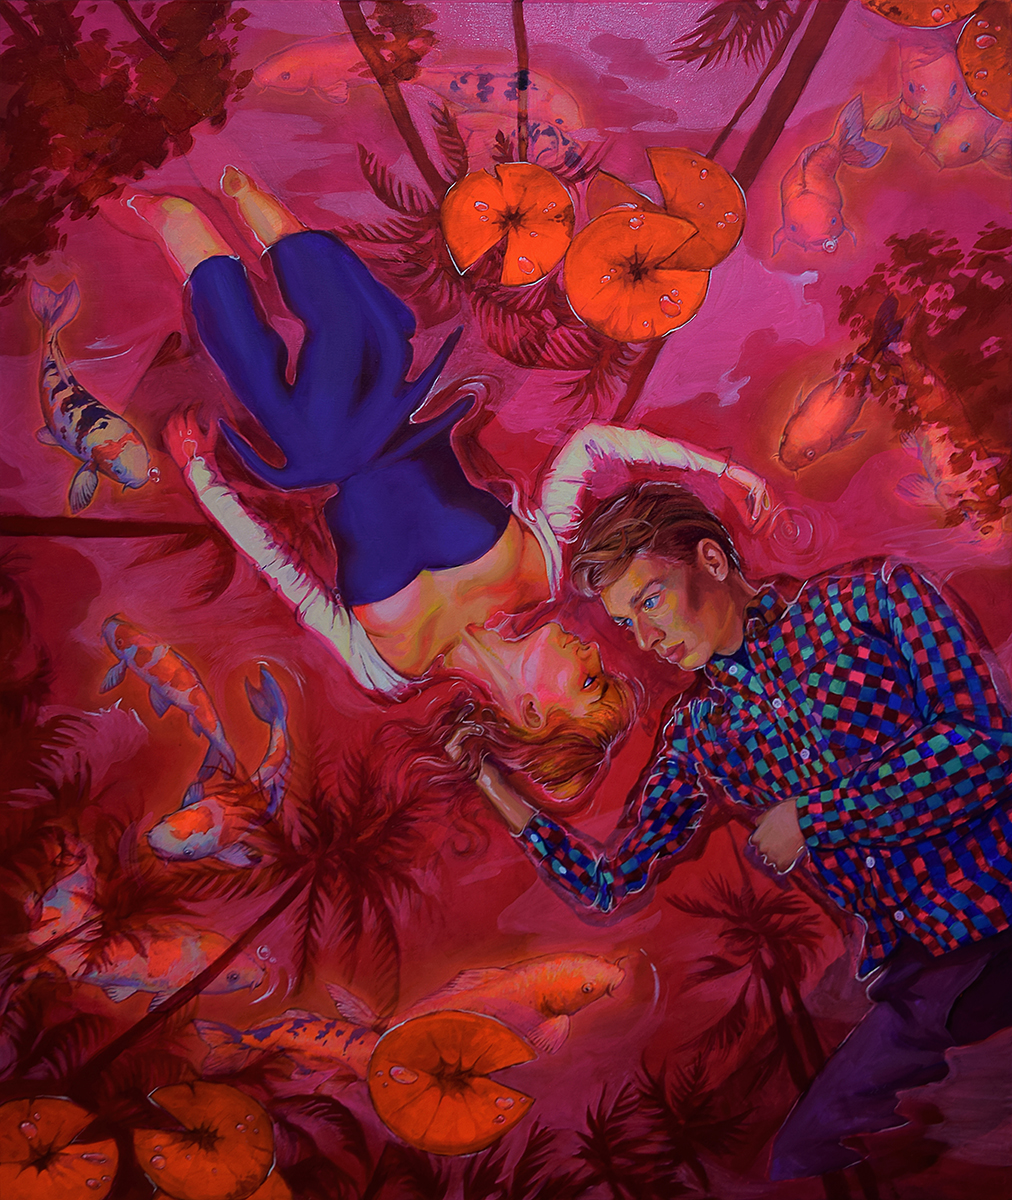 LOVERS IN RED POND 110x130cm Natalia Rak oils and acrylics on canvas